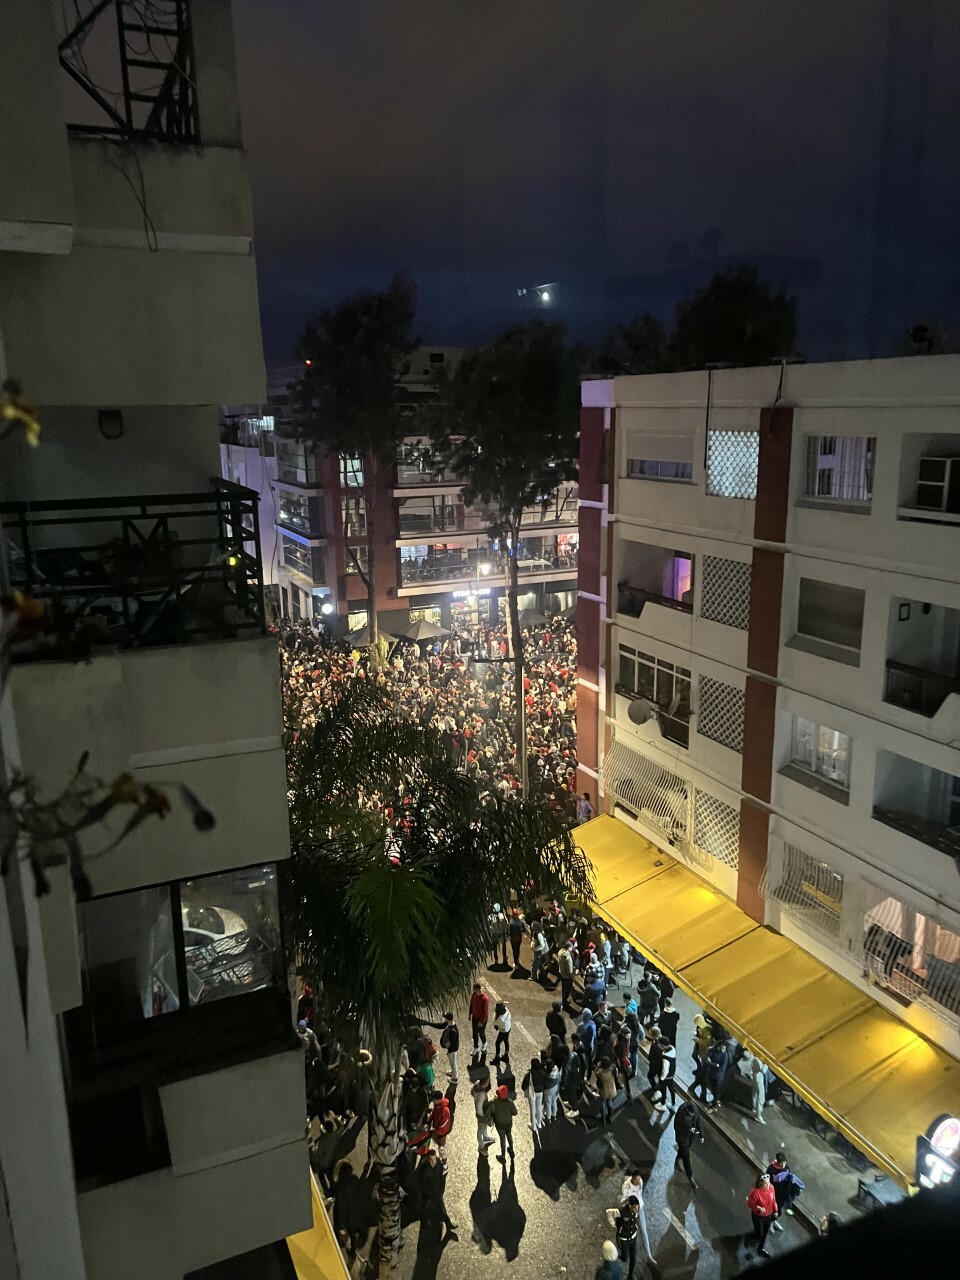 Aerial Image Of Celebrations In The Street